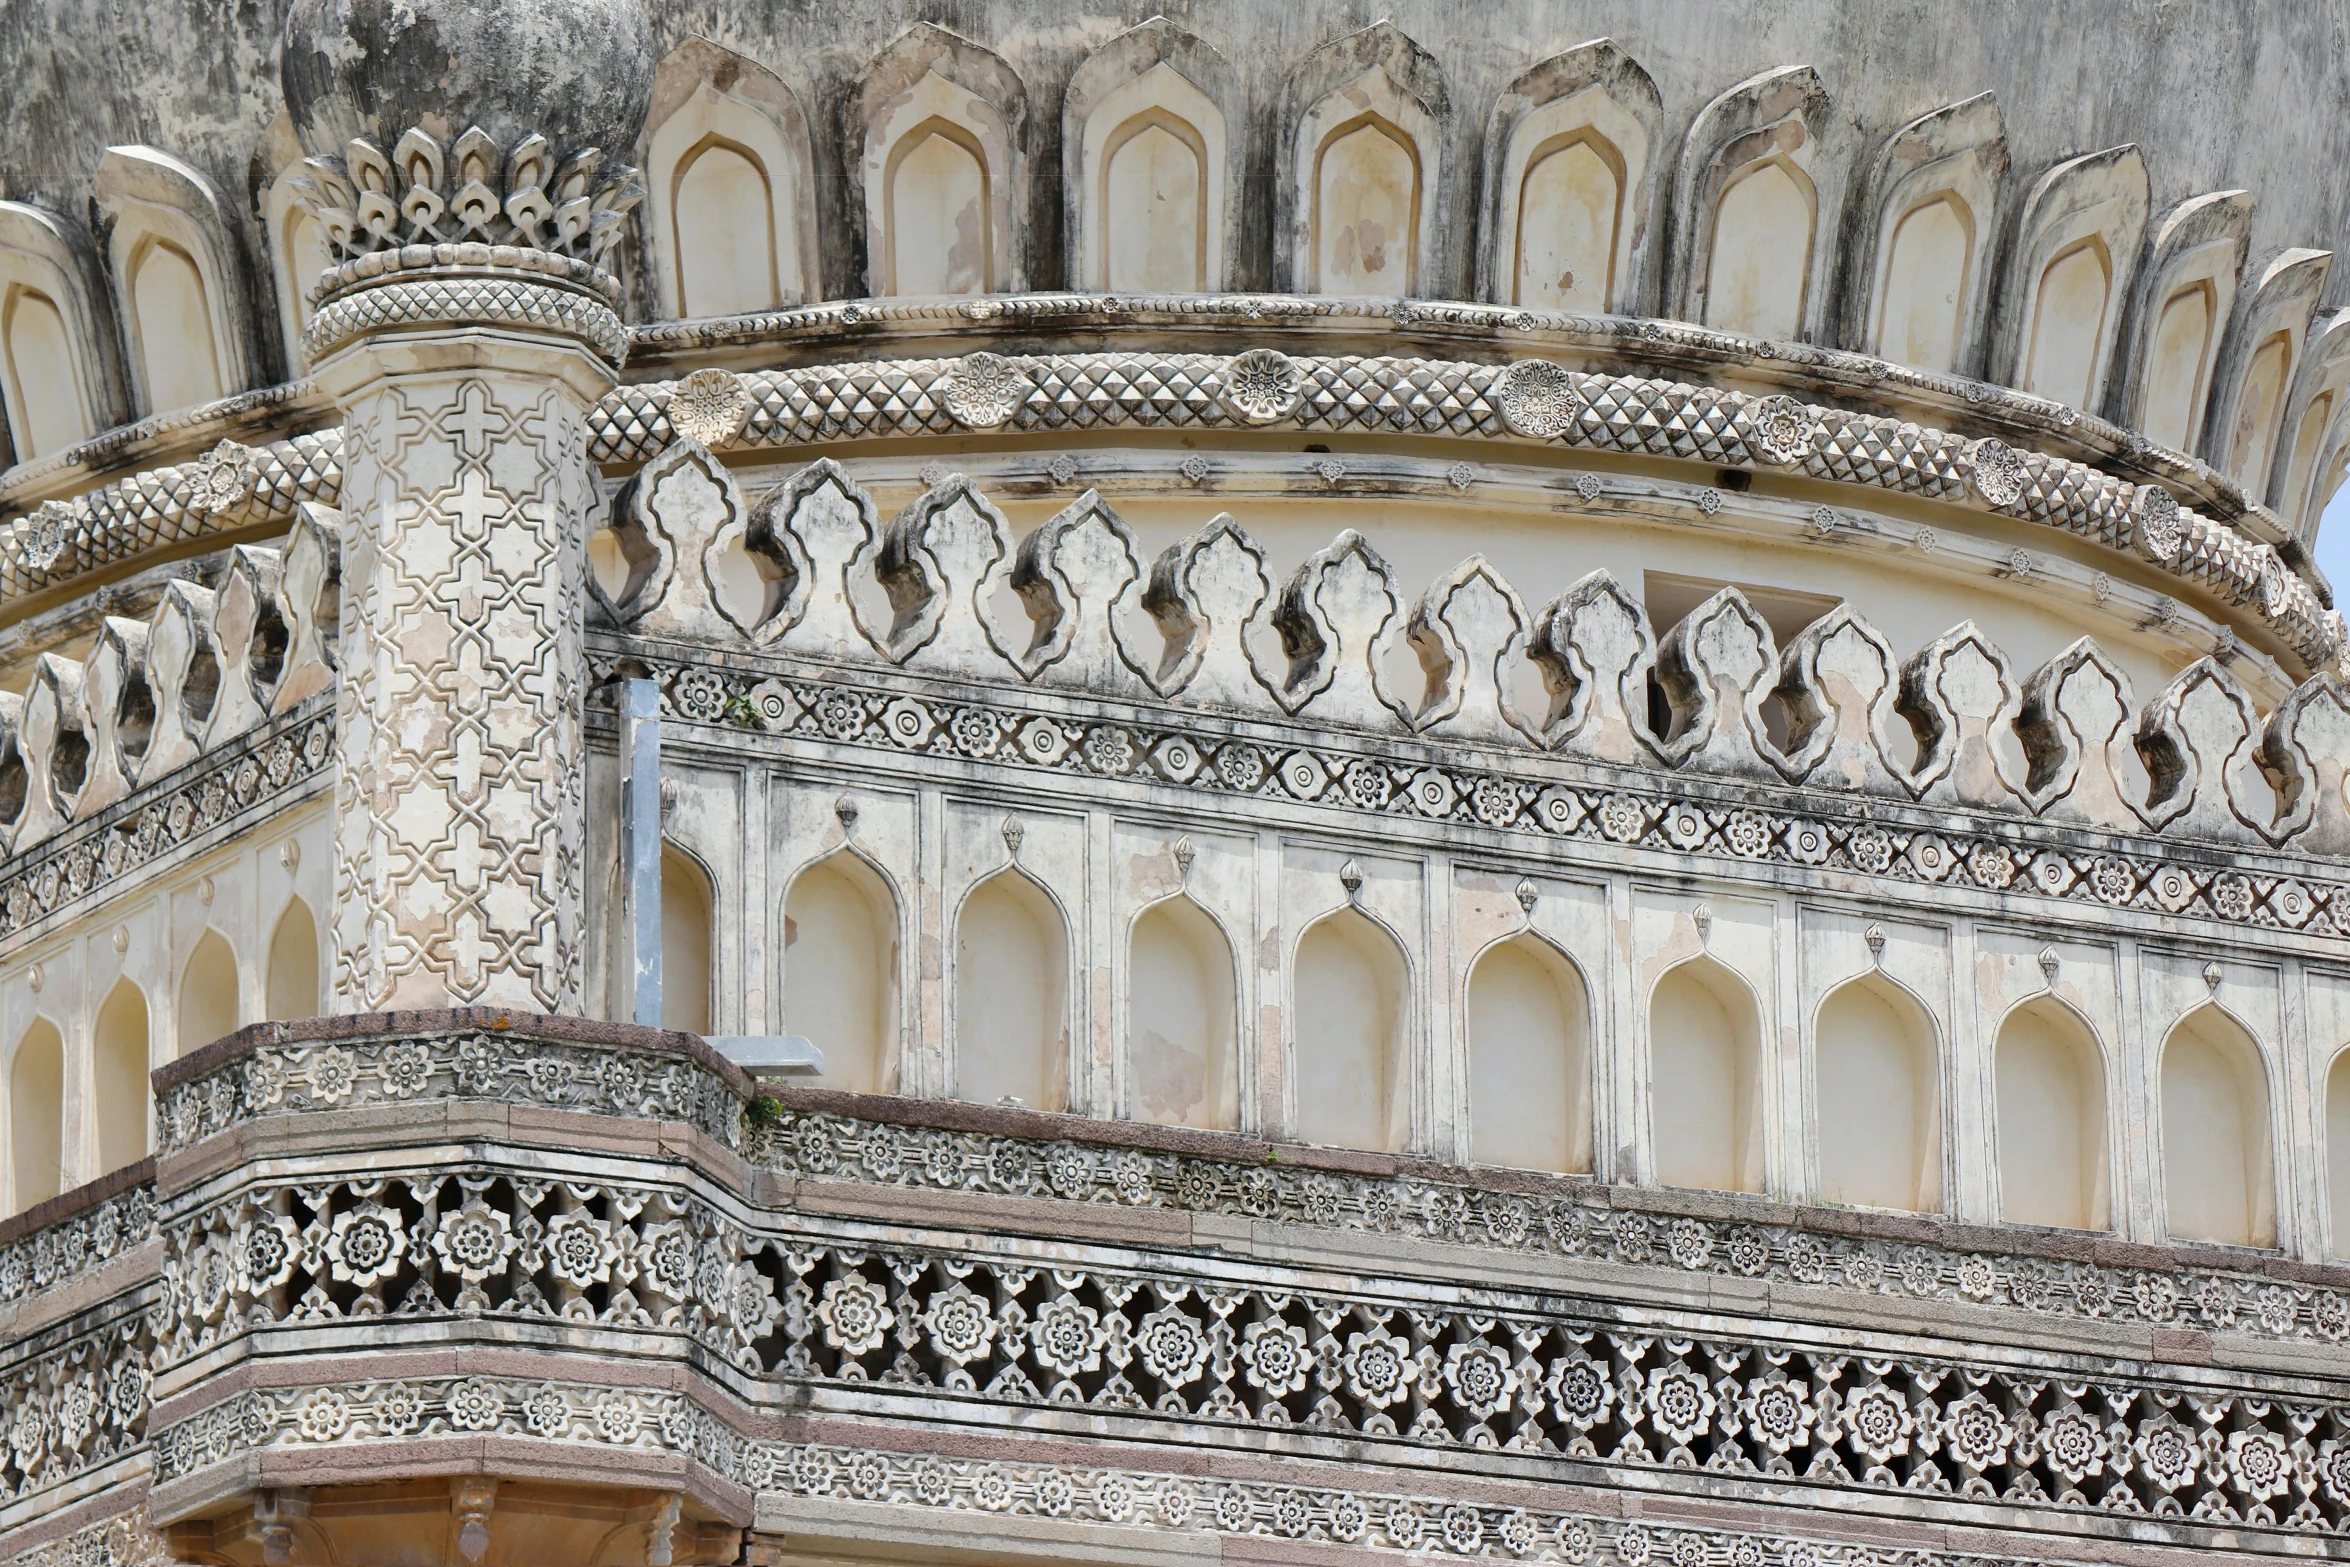 an intricately decorated wall of a church with arched windows